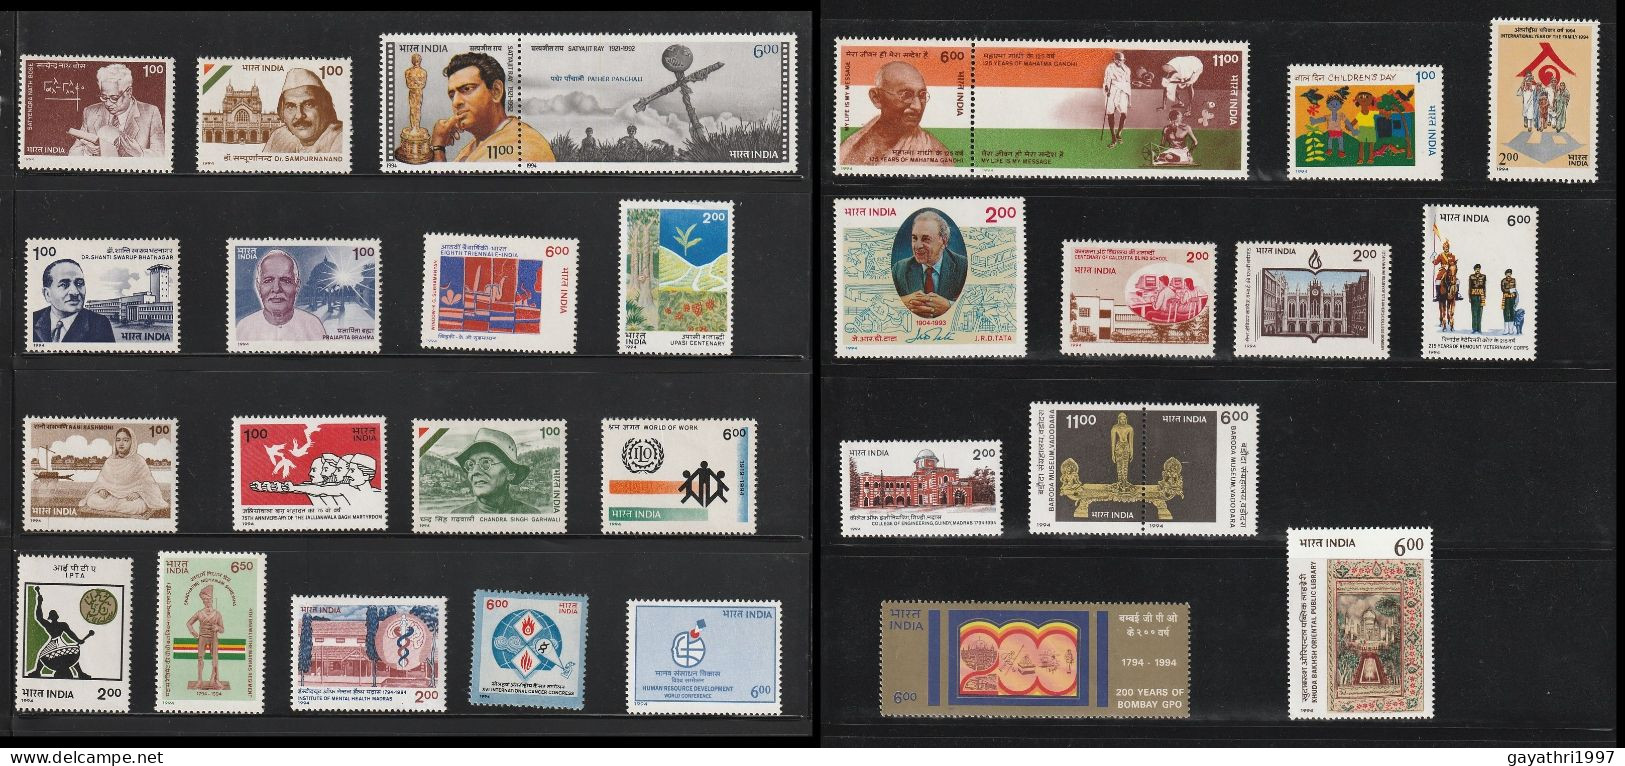 India 1994 Including Withdrawn Issues  Full Year Of Stamps Mint MNH Good Condition 100% Perfect Condition Back Side Also - Años Completos